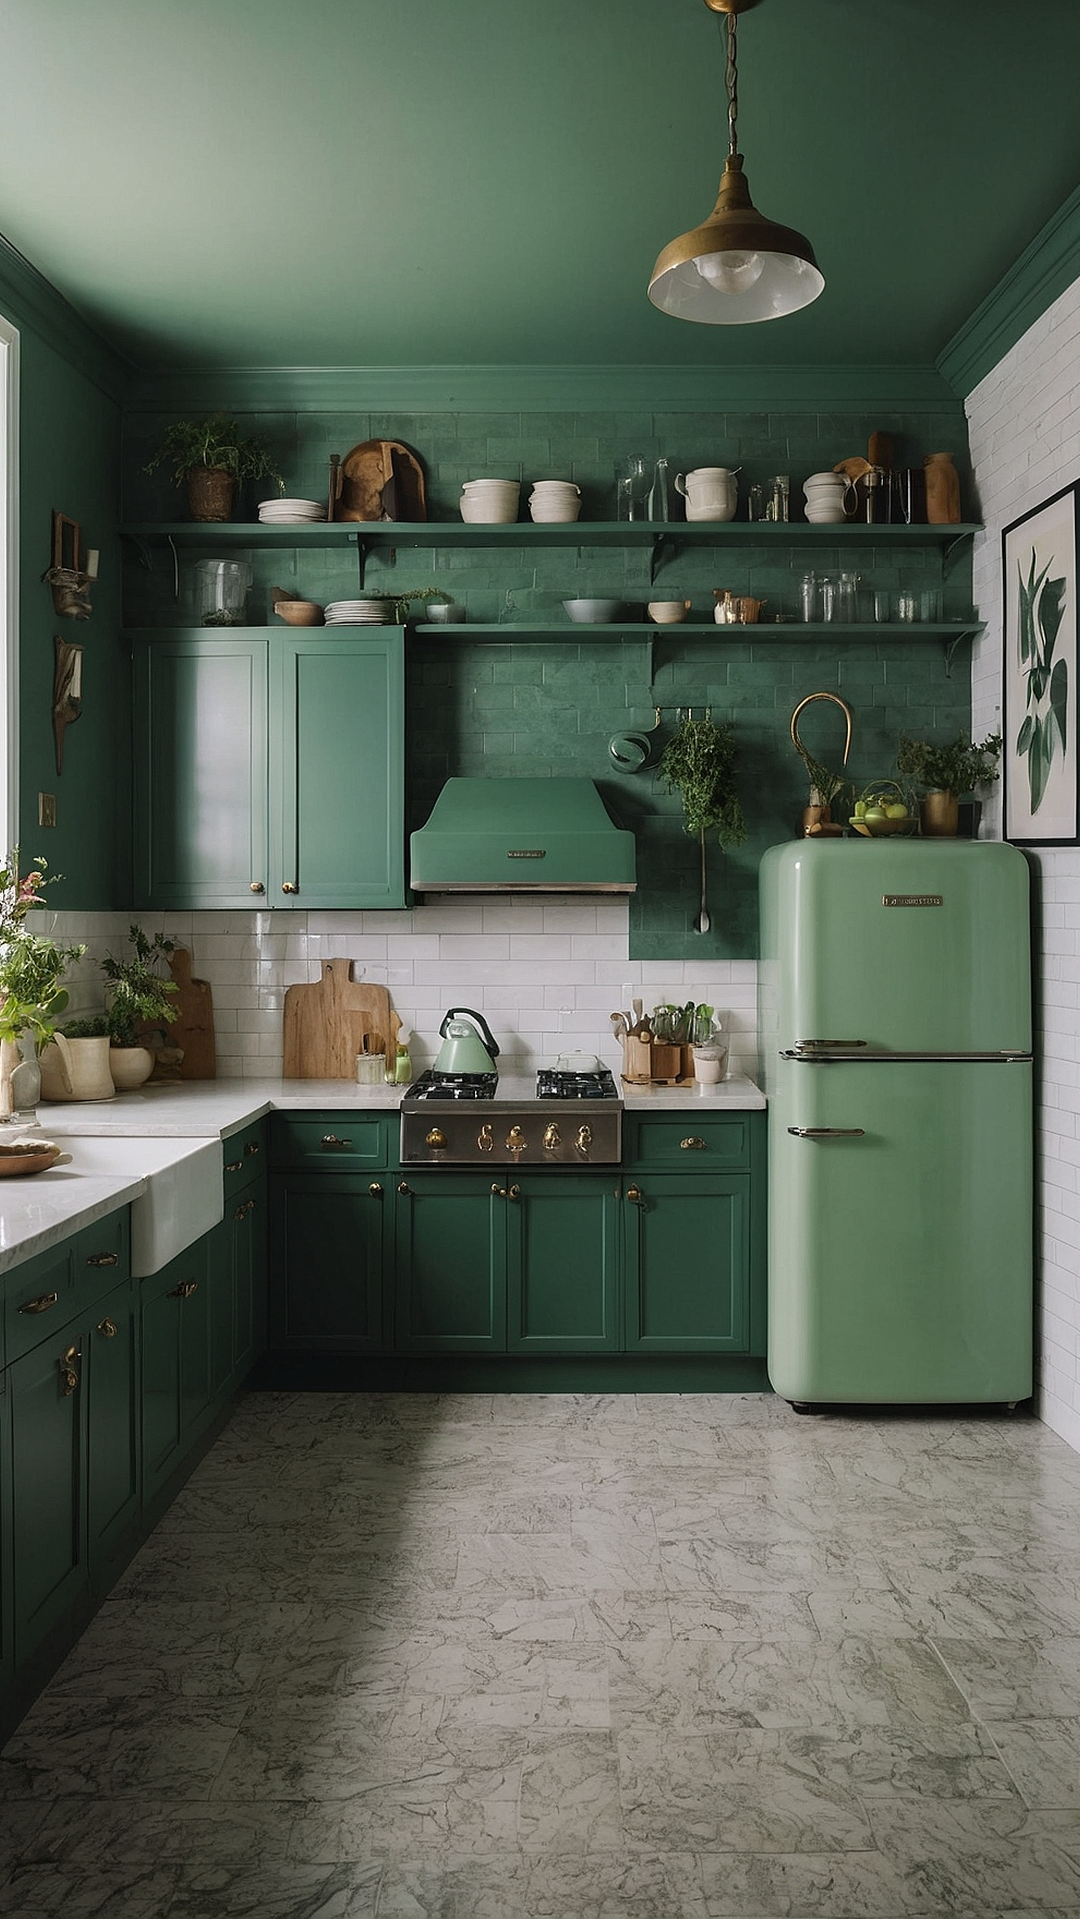 Relaxation in Style: Green Kitchen Inspirations